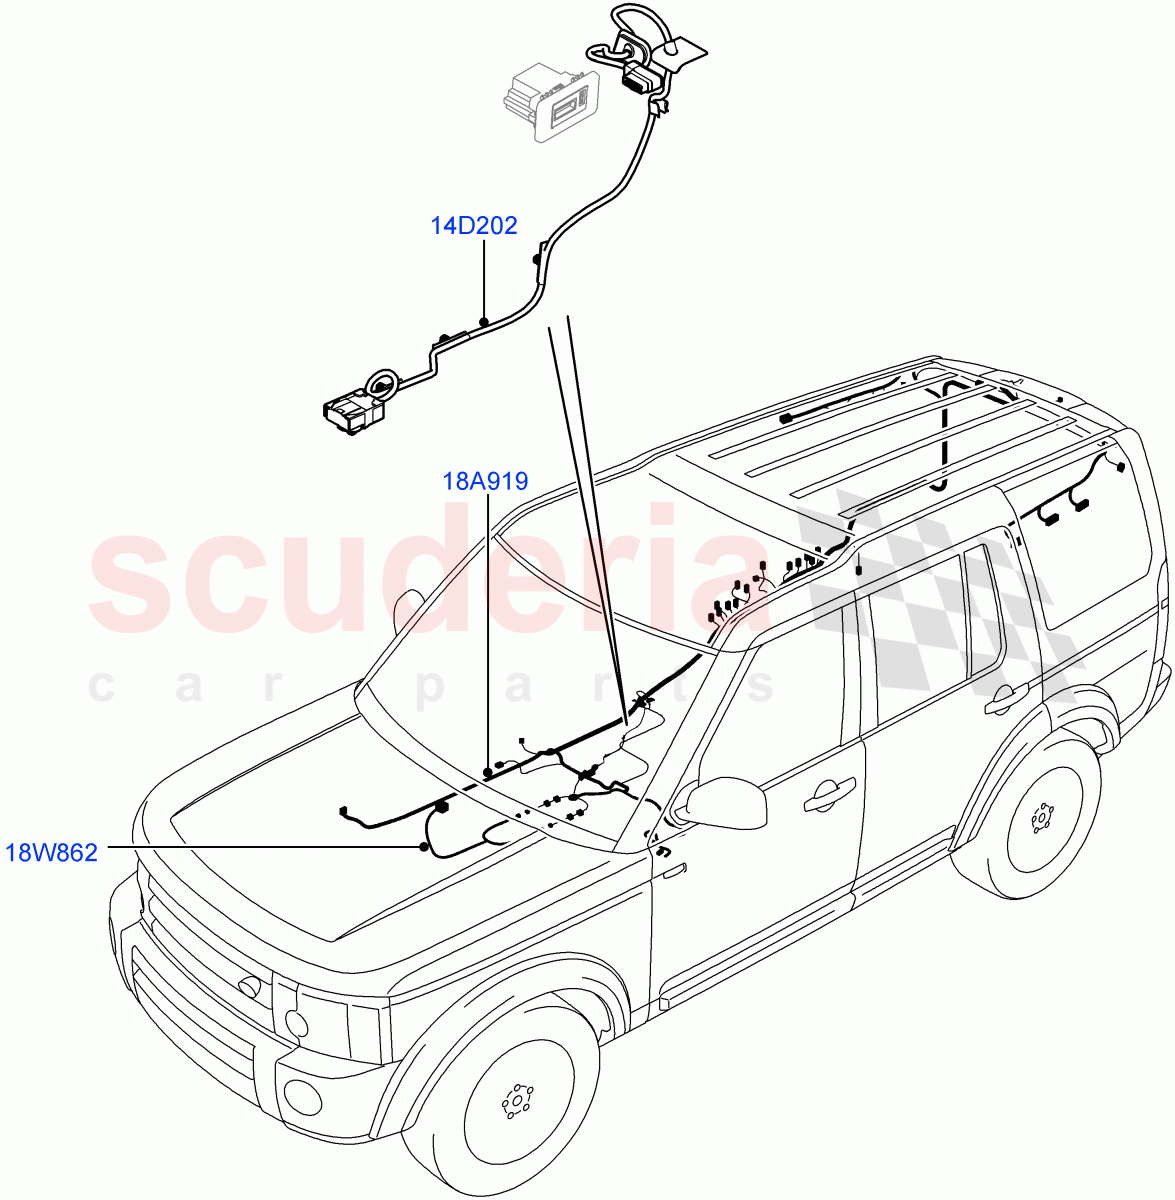 Electrical Wiring - Body And Rear(Audio/Navigation/Entertainment)((V)FROMAA000001,(V)TOAA999999) of Land Rover Land Rover Discovery 4 (2010-2016) [4.0 Petrol V6]